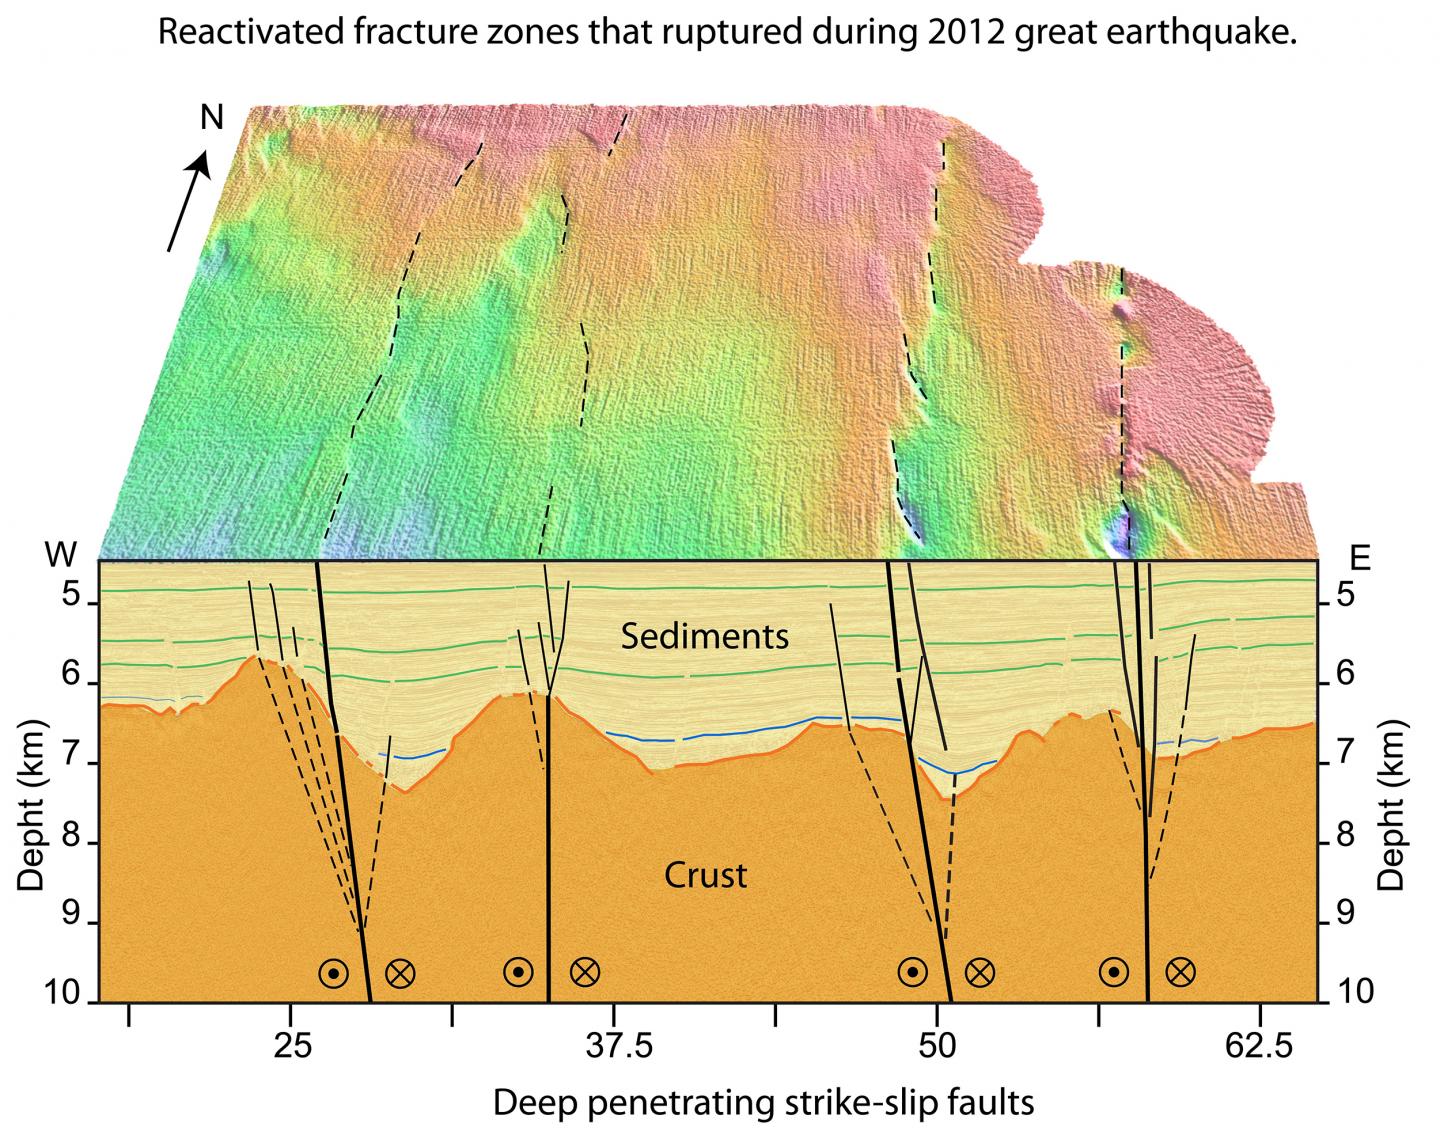 Expedition Discovers Fault System Underlying Largest Intraplate Earthquake on Record (1 of 2)